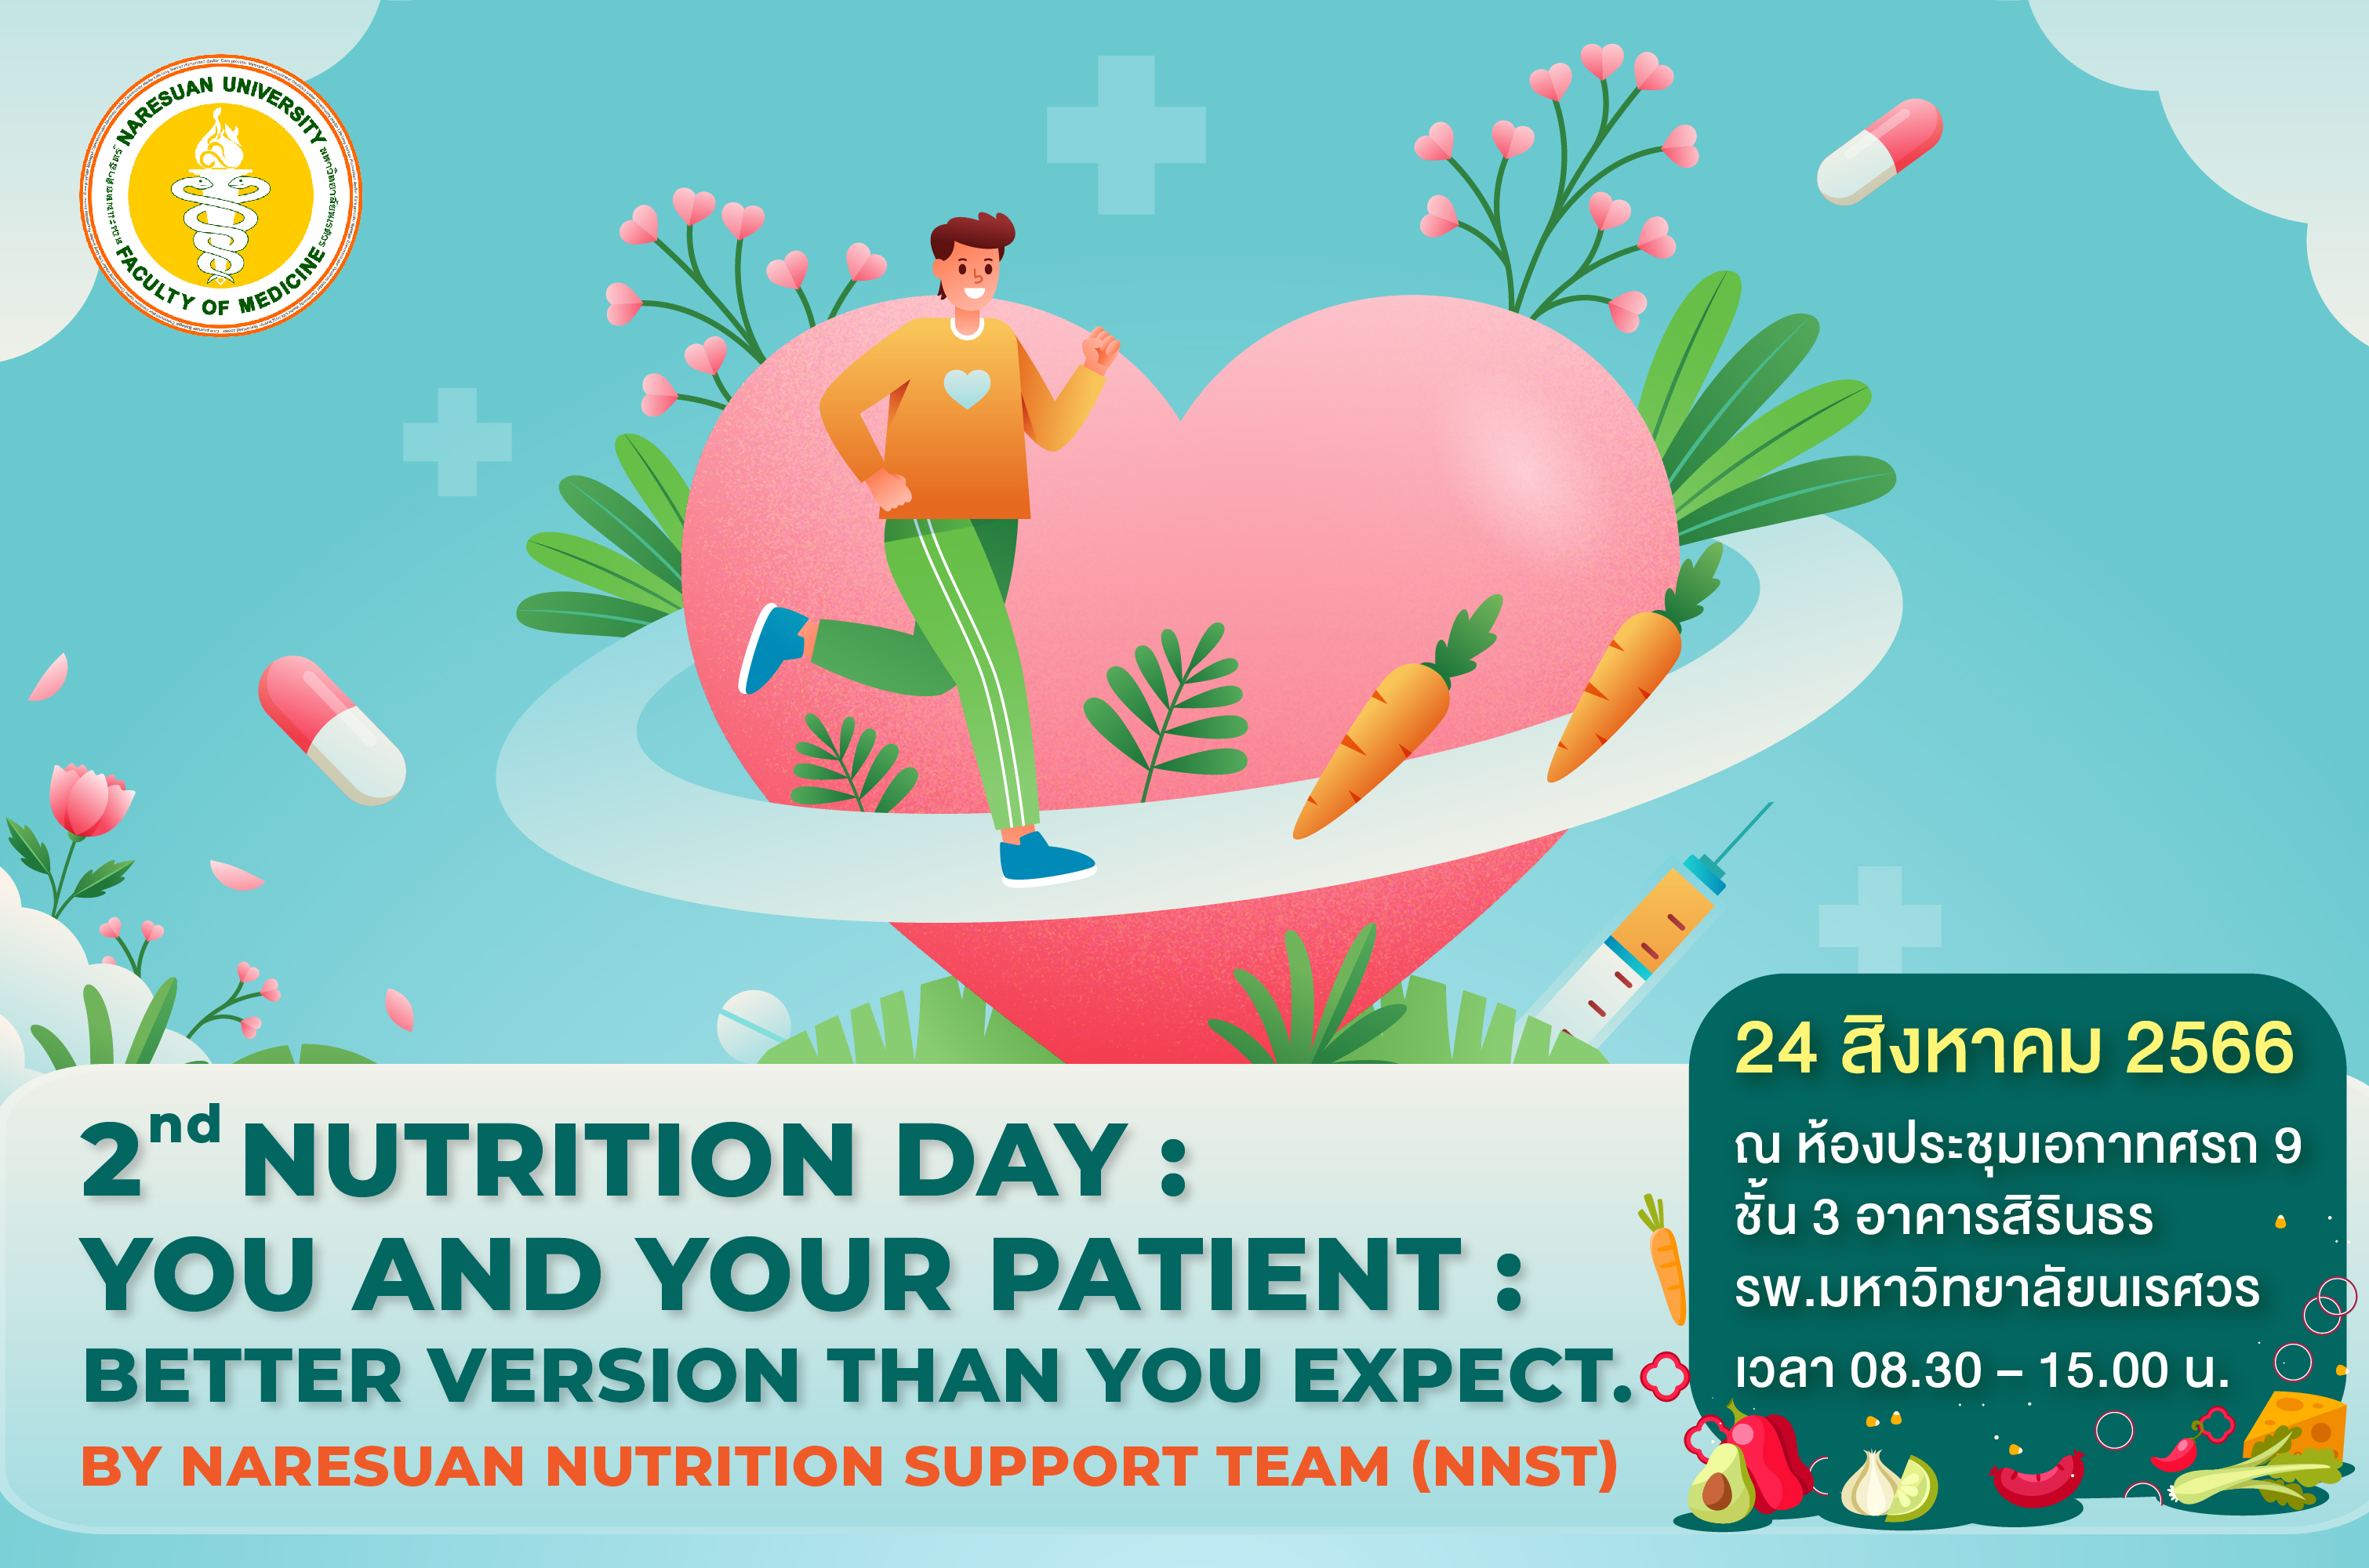 NUTRITION DAY : YOU AND YOUR PATIENT: BETTER VERSION THAN YOU EXPECT.